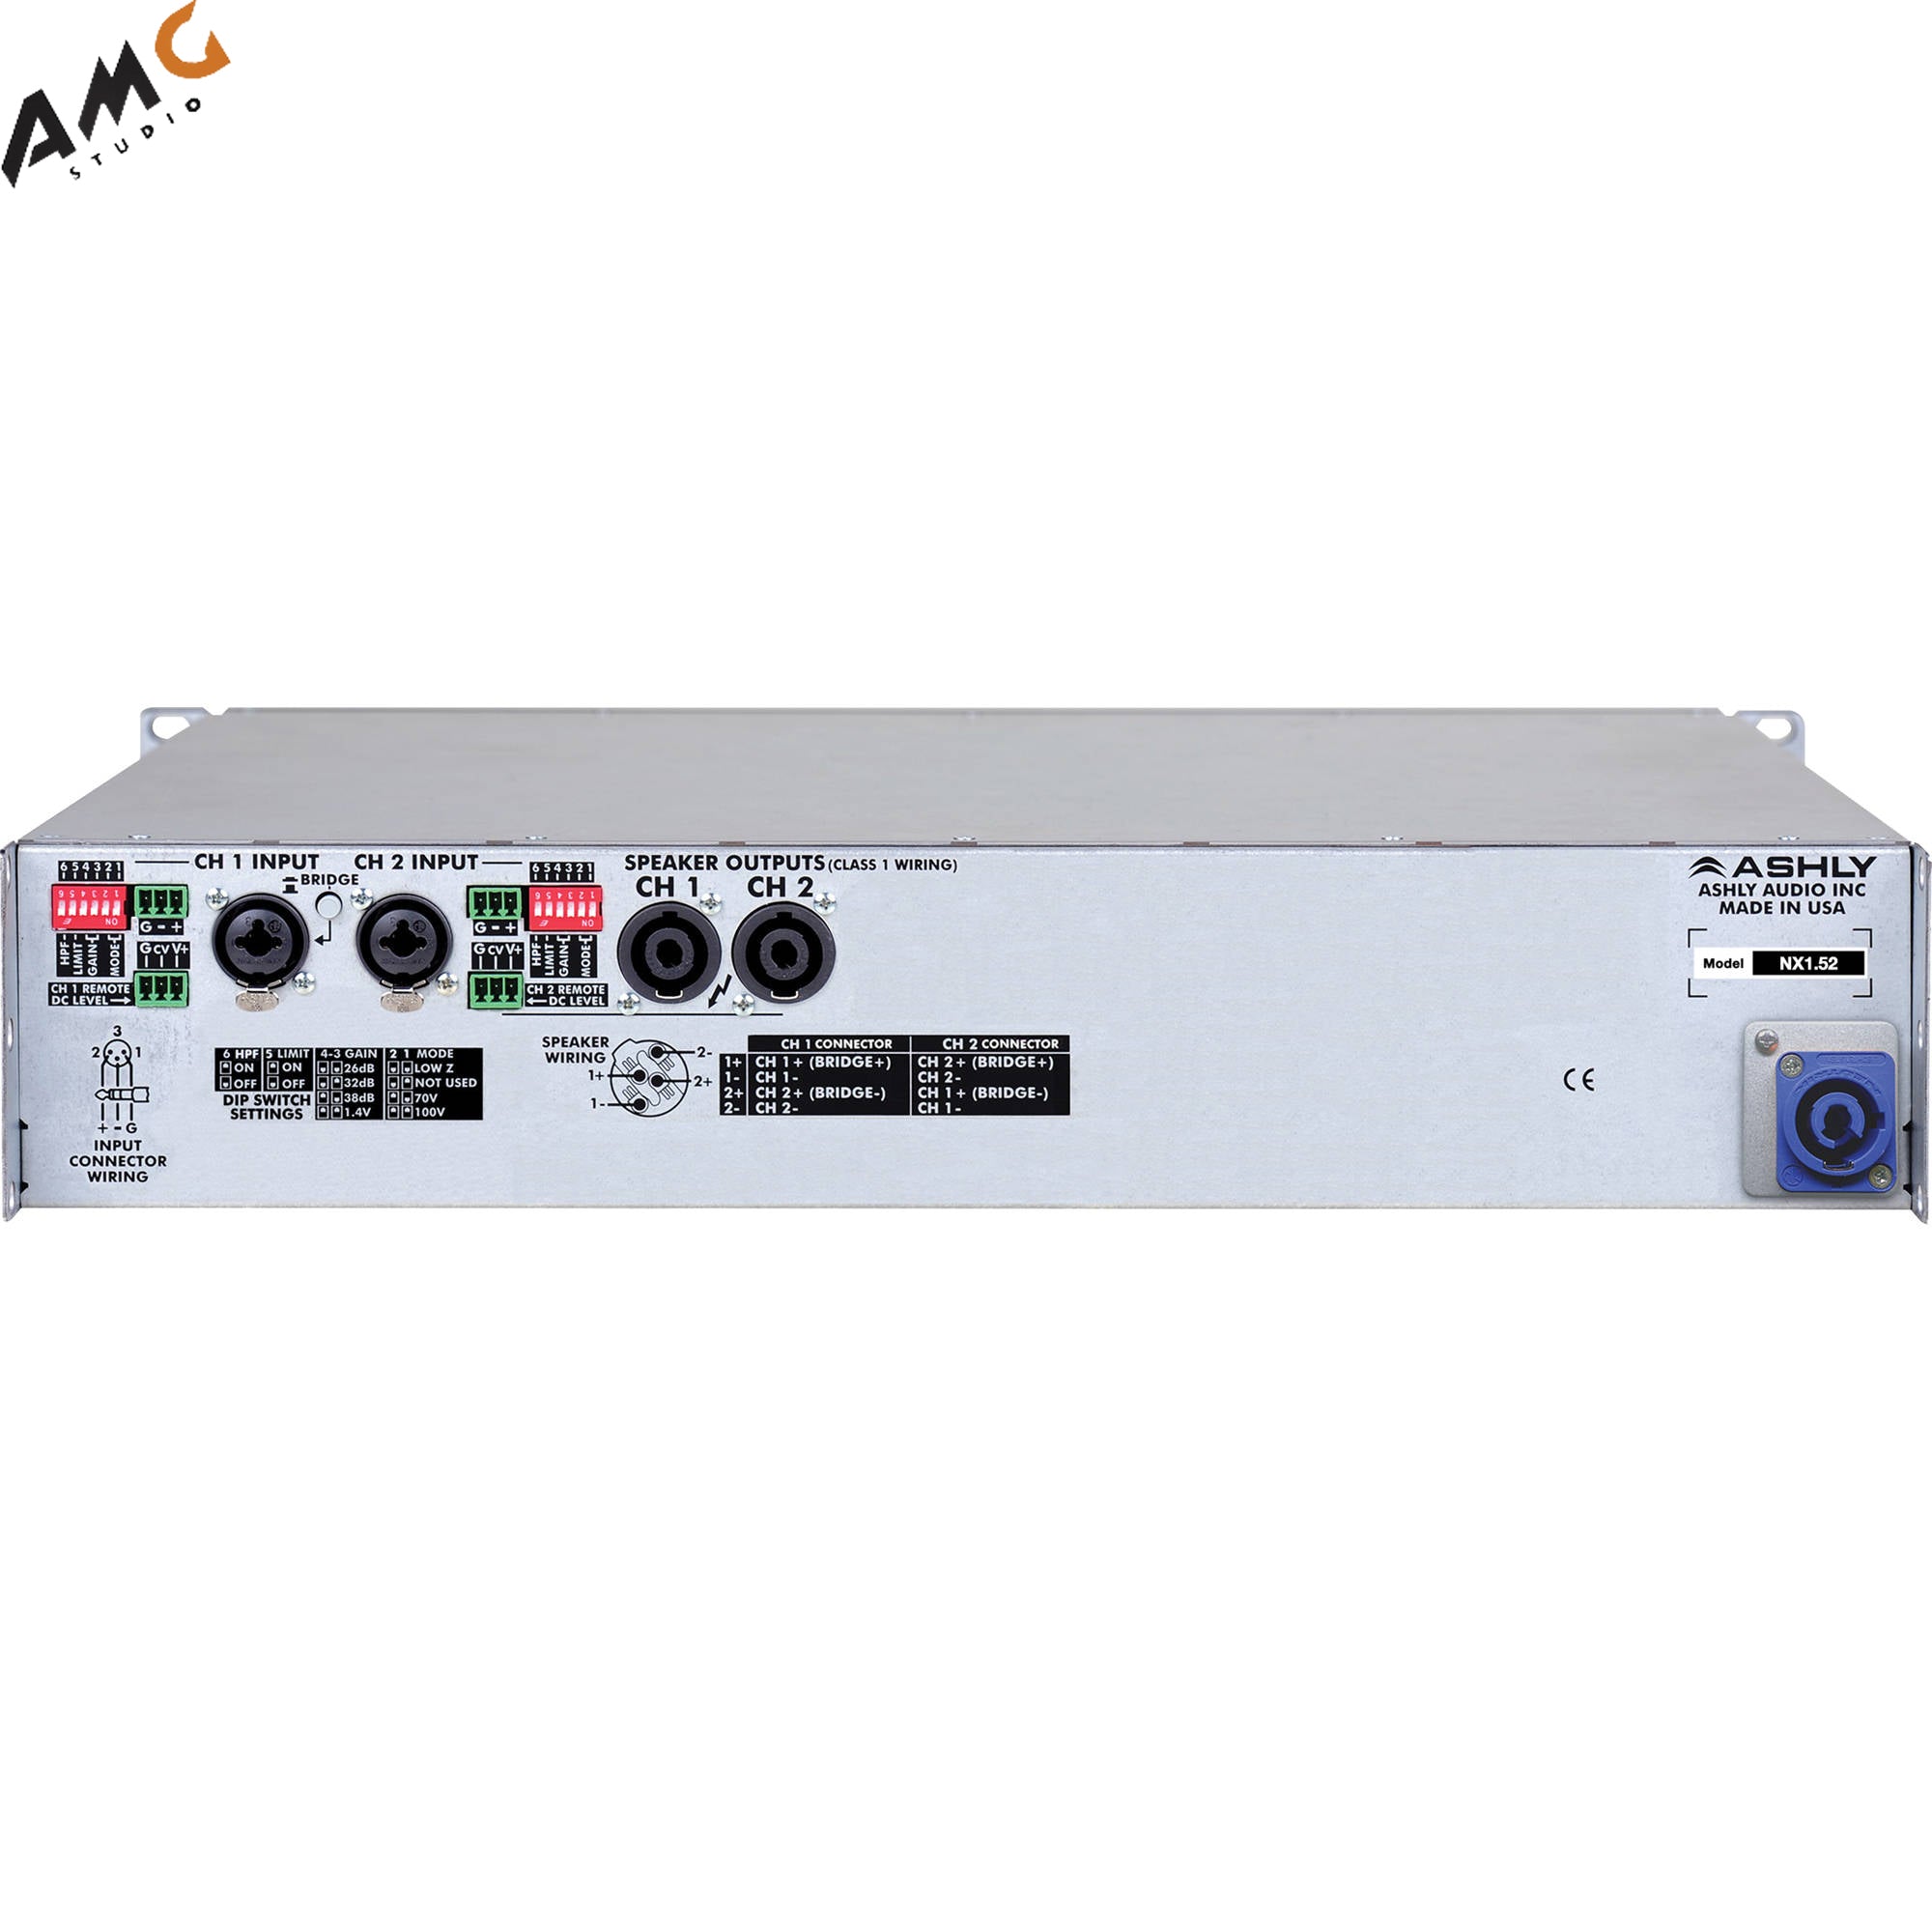 Ashly nX1.52 Power Amplifier 2 x 1500 Watts/2 Ohms with Programmable Outputs - Studio AMG